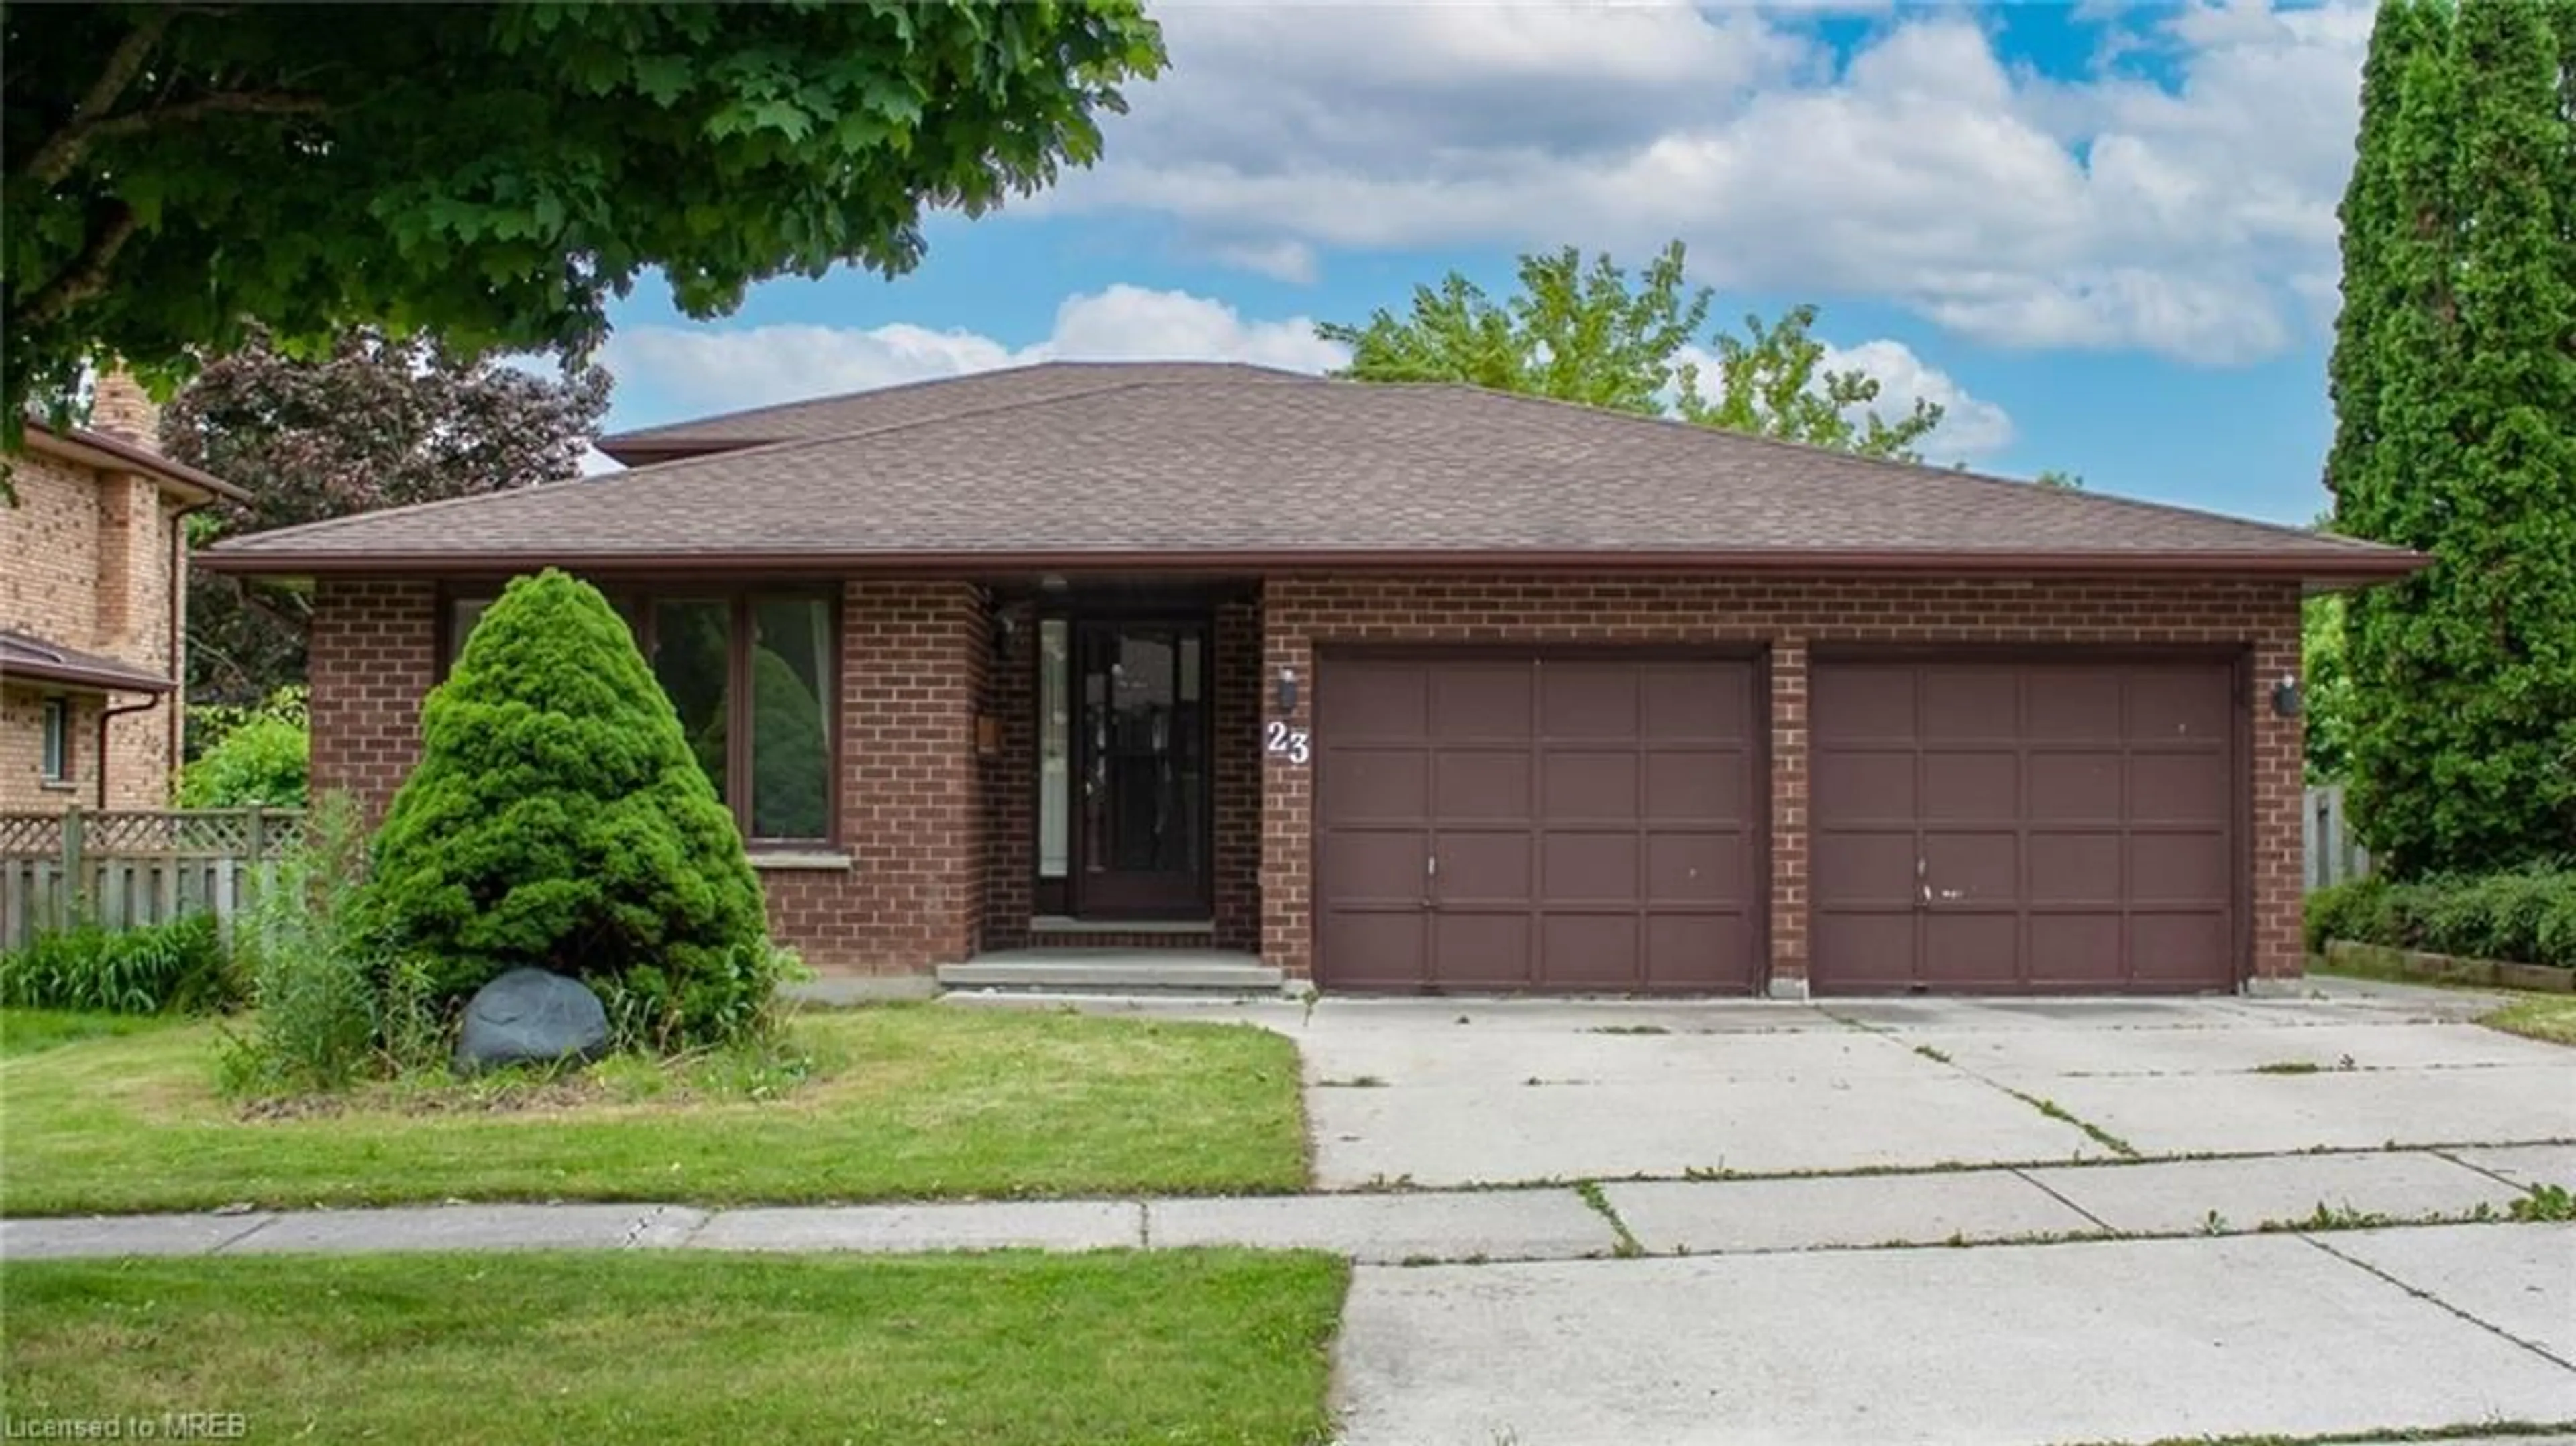 Home with brick exterior material for 23 Walmer Gdns, London Ontario N6G 4H4